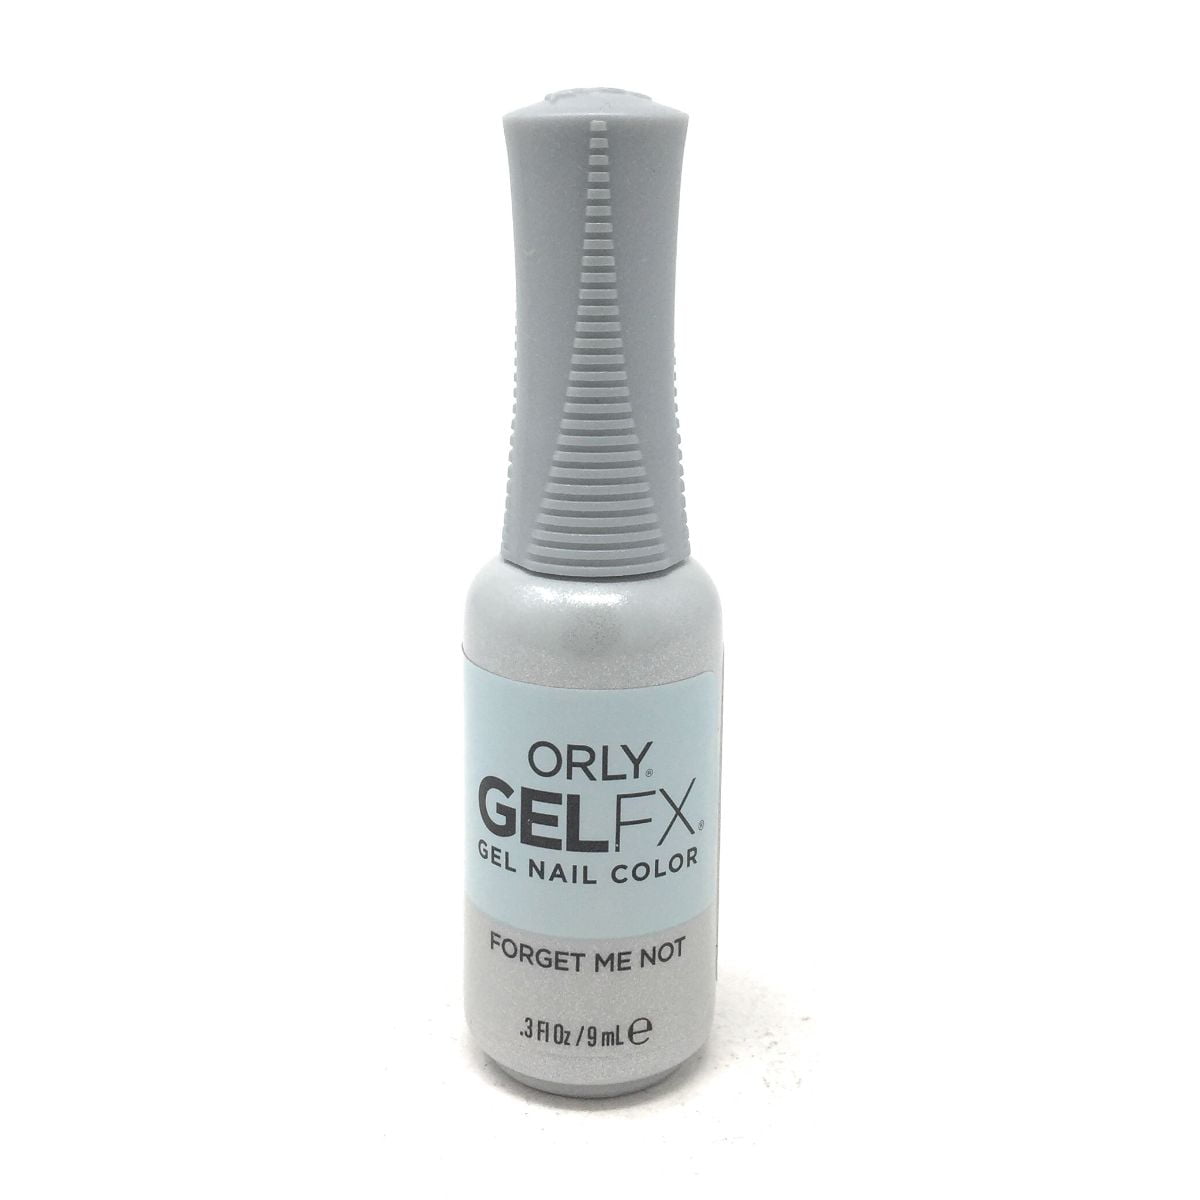 Gel Gel Nail Color # 30926 - Forget Me Not Orly oz Nail Polish For - Walmart.com